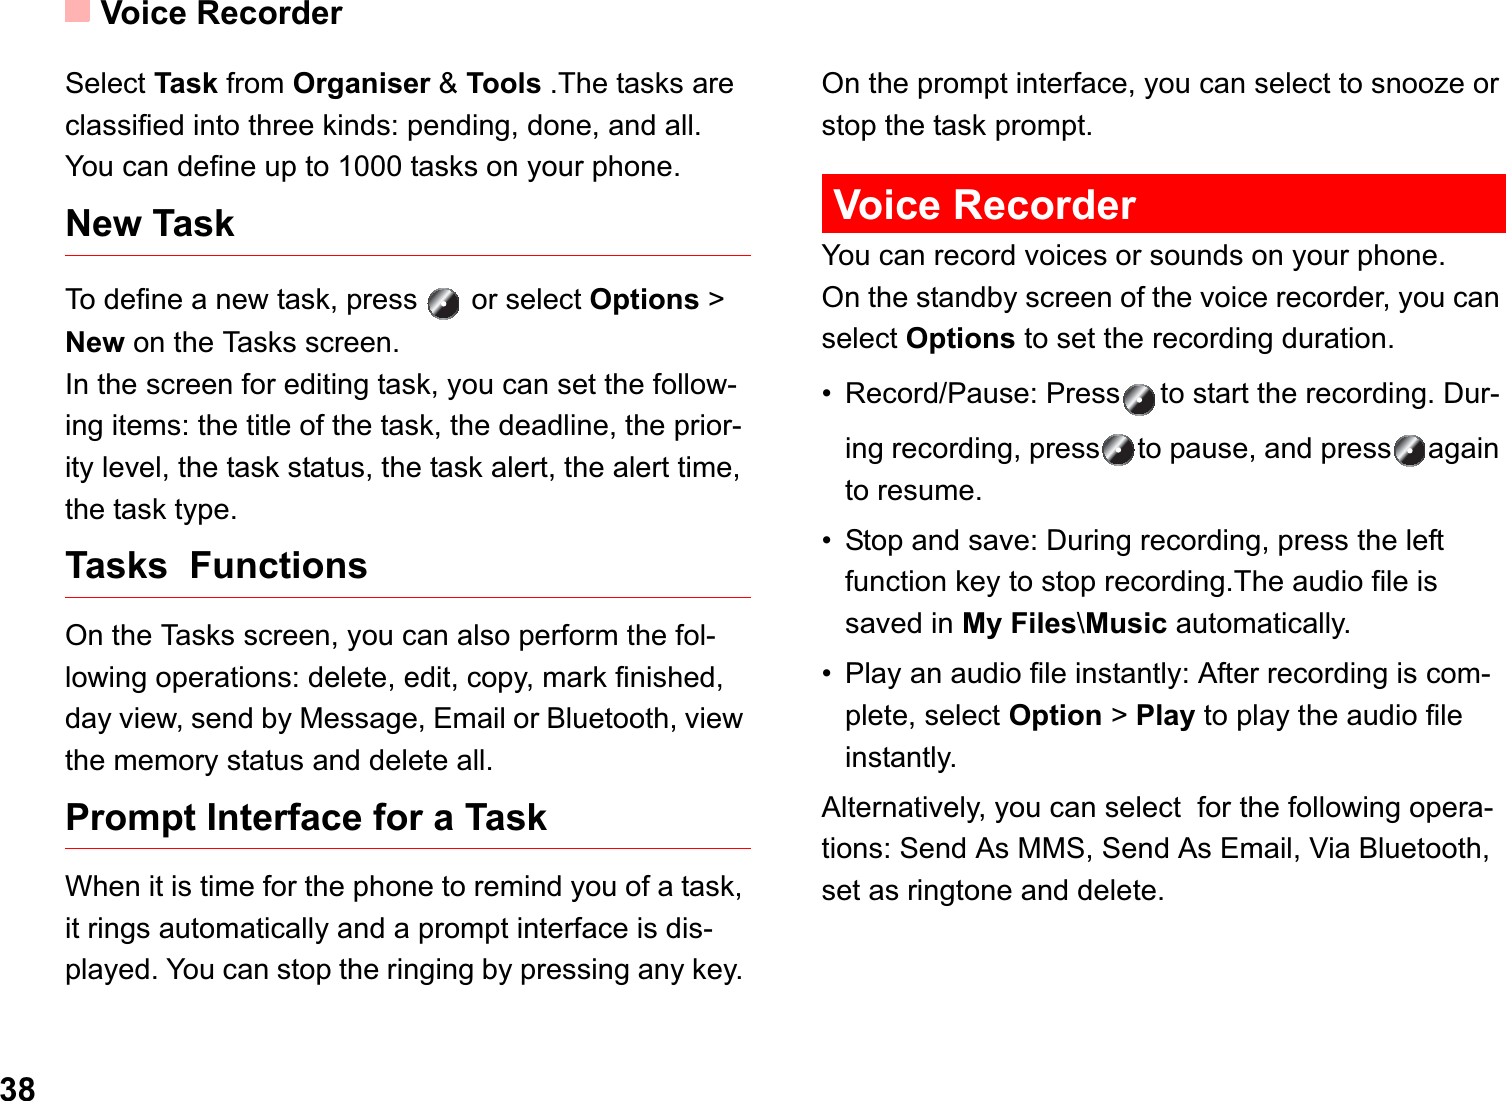 Voice Recorder38Select Task from Organiser &amp; Tools .The tasks are classified into three kinds: pending, done, and all. You can define up to 1000 tasks on your phone.New TaskTo define a new task, press   or select Options &gt; New on the Tasks screen.In the screen for editing task, you can set the follow-ing items: the title of the task, the deadline, the prior-ity level, the task status, the task alert, the alert time, the task type.Tasks  Functions On the Tasks screen, you can also perform the fol-lowing operations: delete, edit, copy, mark finished, day view, send by Message, Email or Bluetooth, view the memory status and delete all.Prompt Interface for a TaskWhen it is time for the phone to remind you of a task, it rings automatically and a prompt interface is dis-played. You can stop the ringing by pressing any key. On the prompt interface, you can select to snooze or stop the task prompt.Voice RecorderYou can record voices or sounds on your phone.  On the standby screen of the voice recorder, you can select Options to set the recording duration.• Record/Pause: Press to start the recording. Dur-ing recording, press to pause, and press again to resume.• Stop and save: During recording, press the left function key to stop recording.The audio file is saved in My Files\Music automatically.• Play an audio file instantly: After recording is com-plete, select Option &gt; Play to play the audio file instantly.Alternatively, you can select  for the following opera-tions: Send As MMS, Send As Email, Via Bluetooth, set as ringtone and delete.